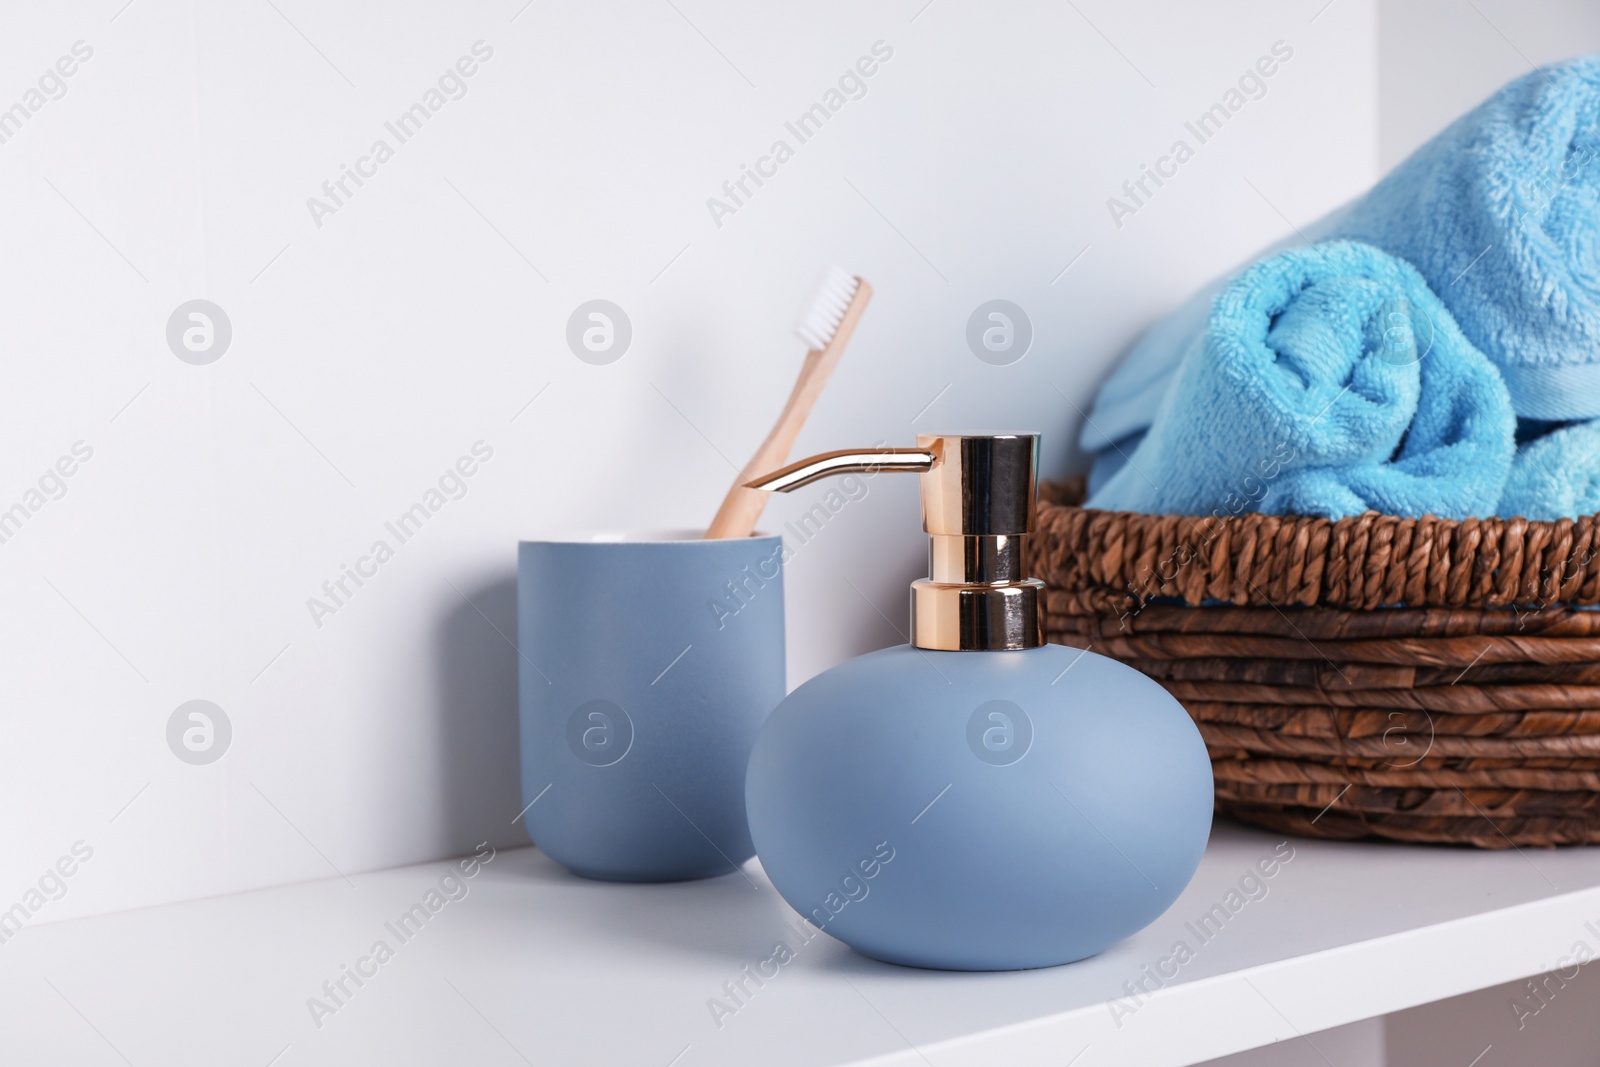 Photo of Stylish soap dispenser, holder with toothbrush and towels on shelf